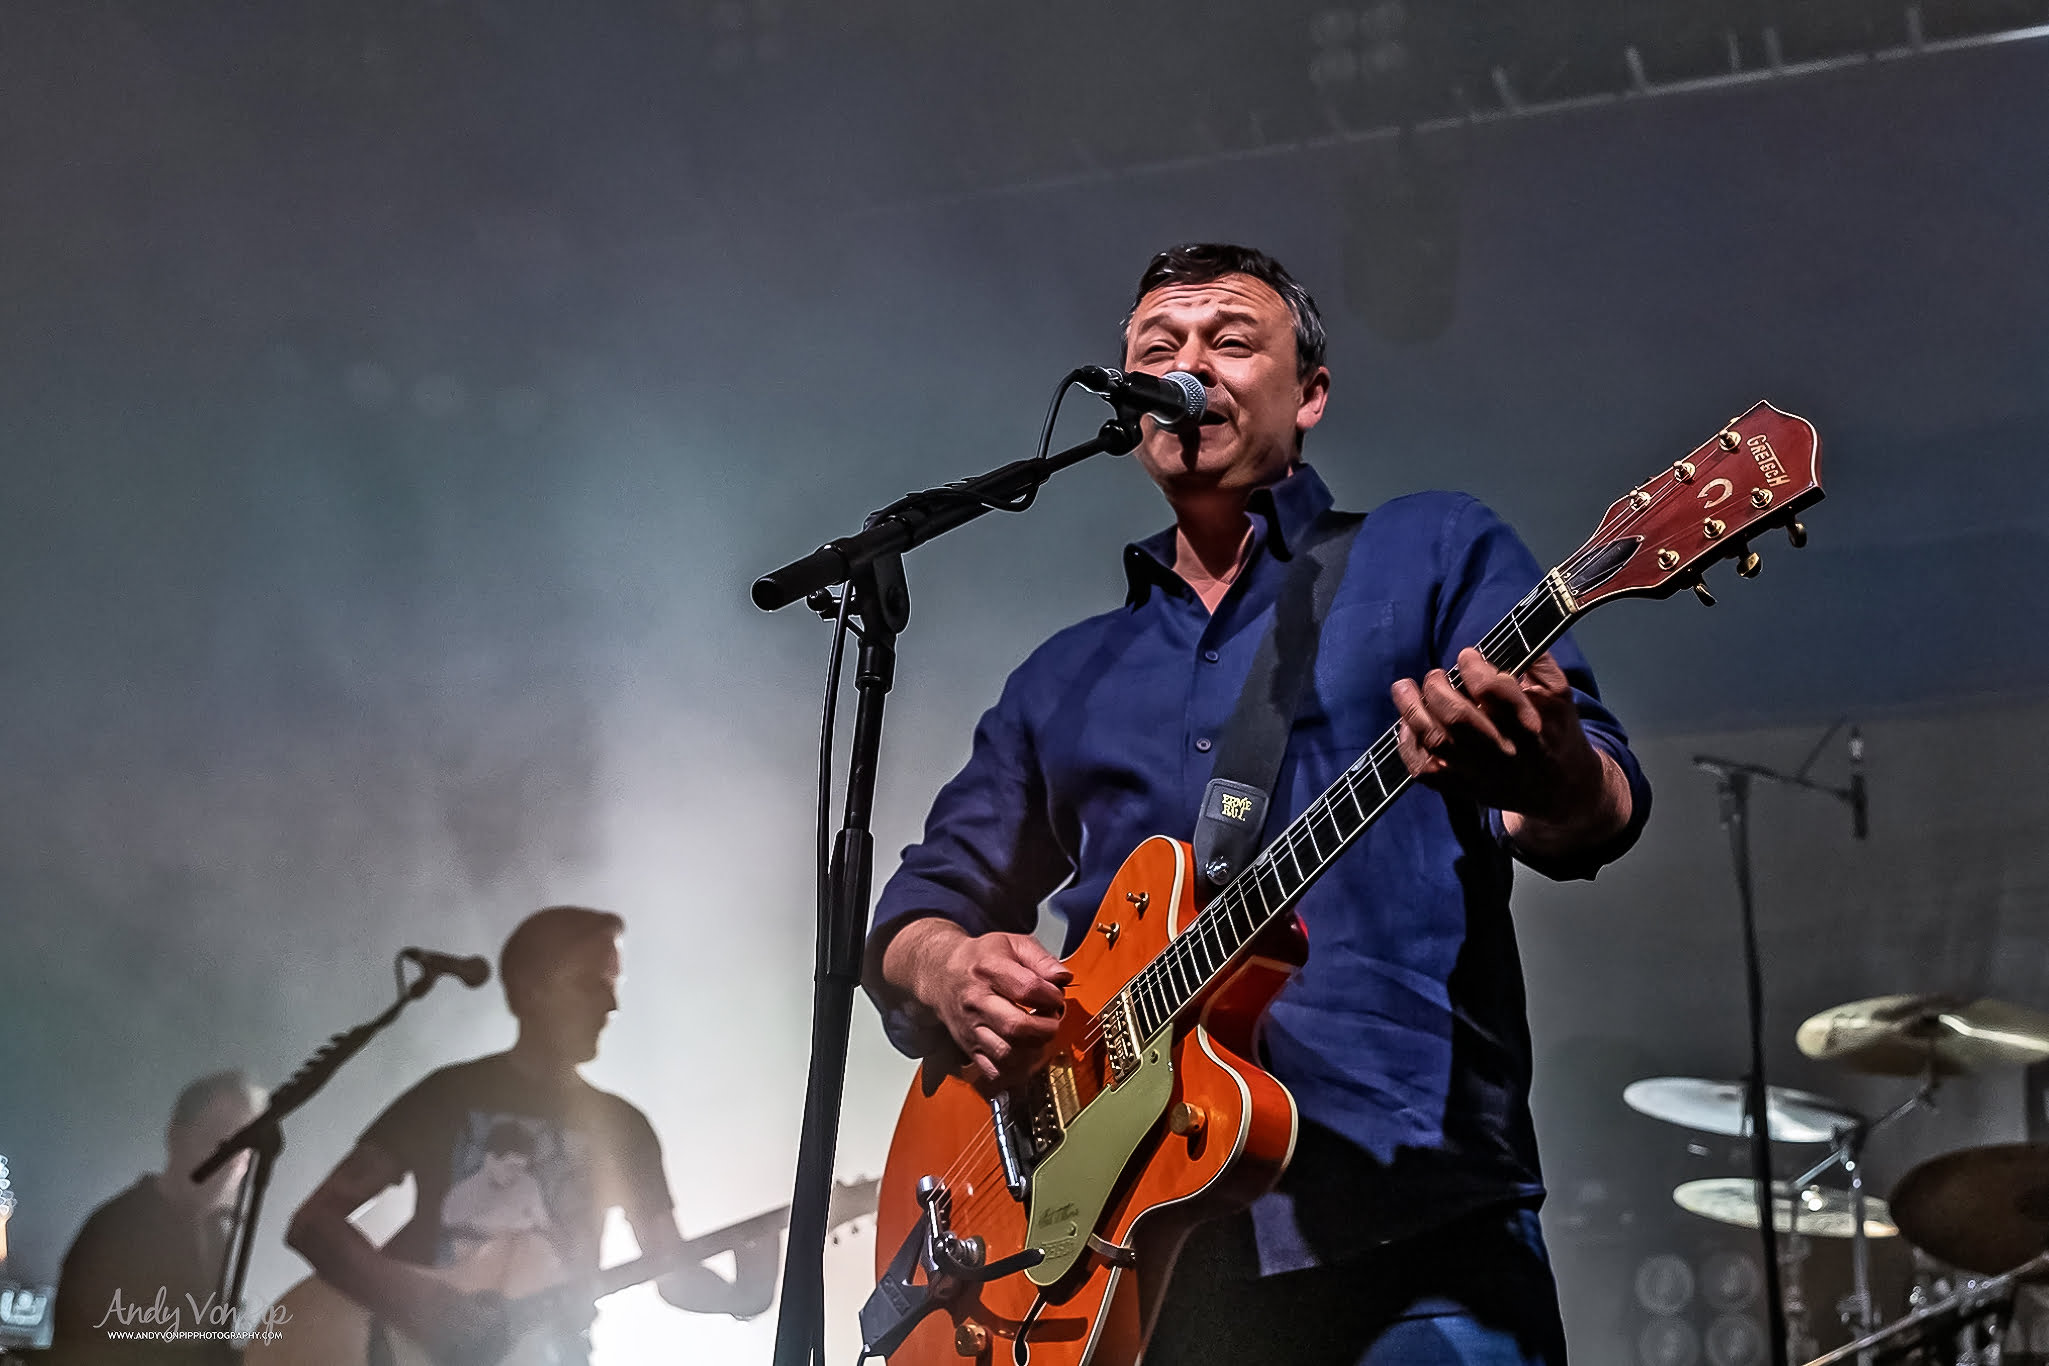 Manic Street Preachers brought their "This Is My Truth Tell Me Yours" tour to a sold out Liverpool Olympia 